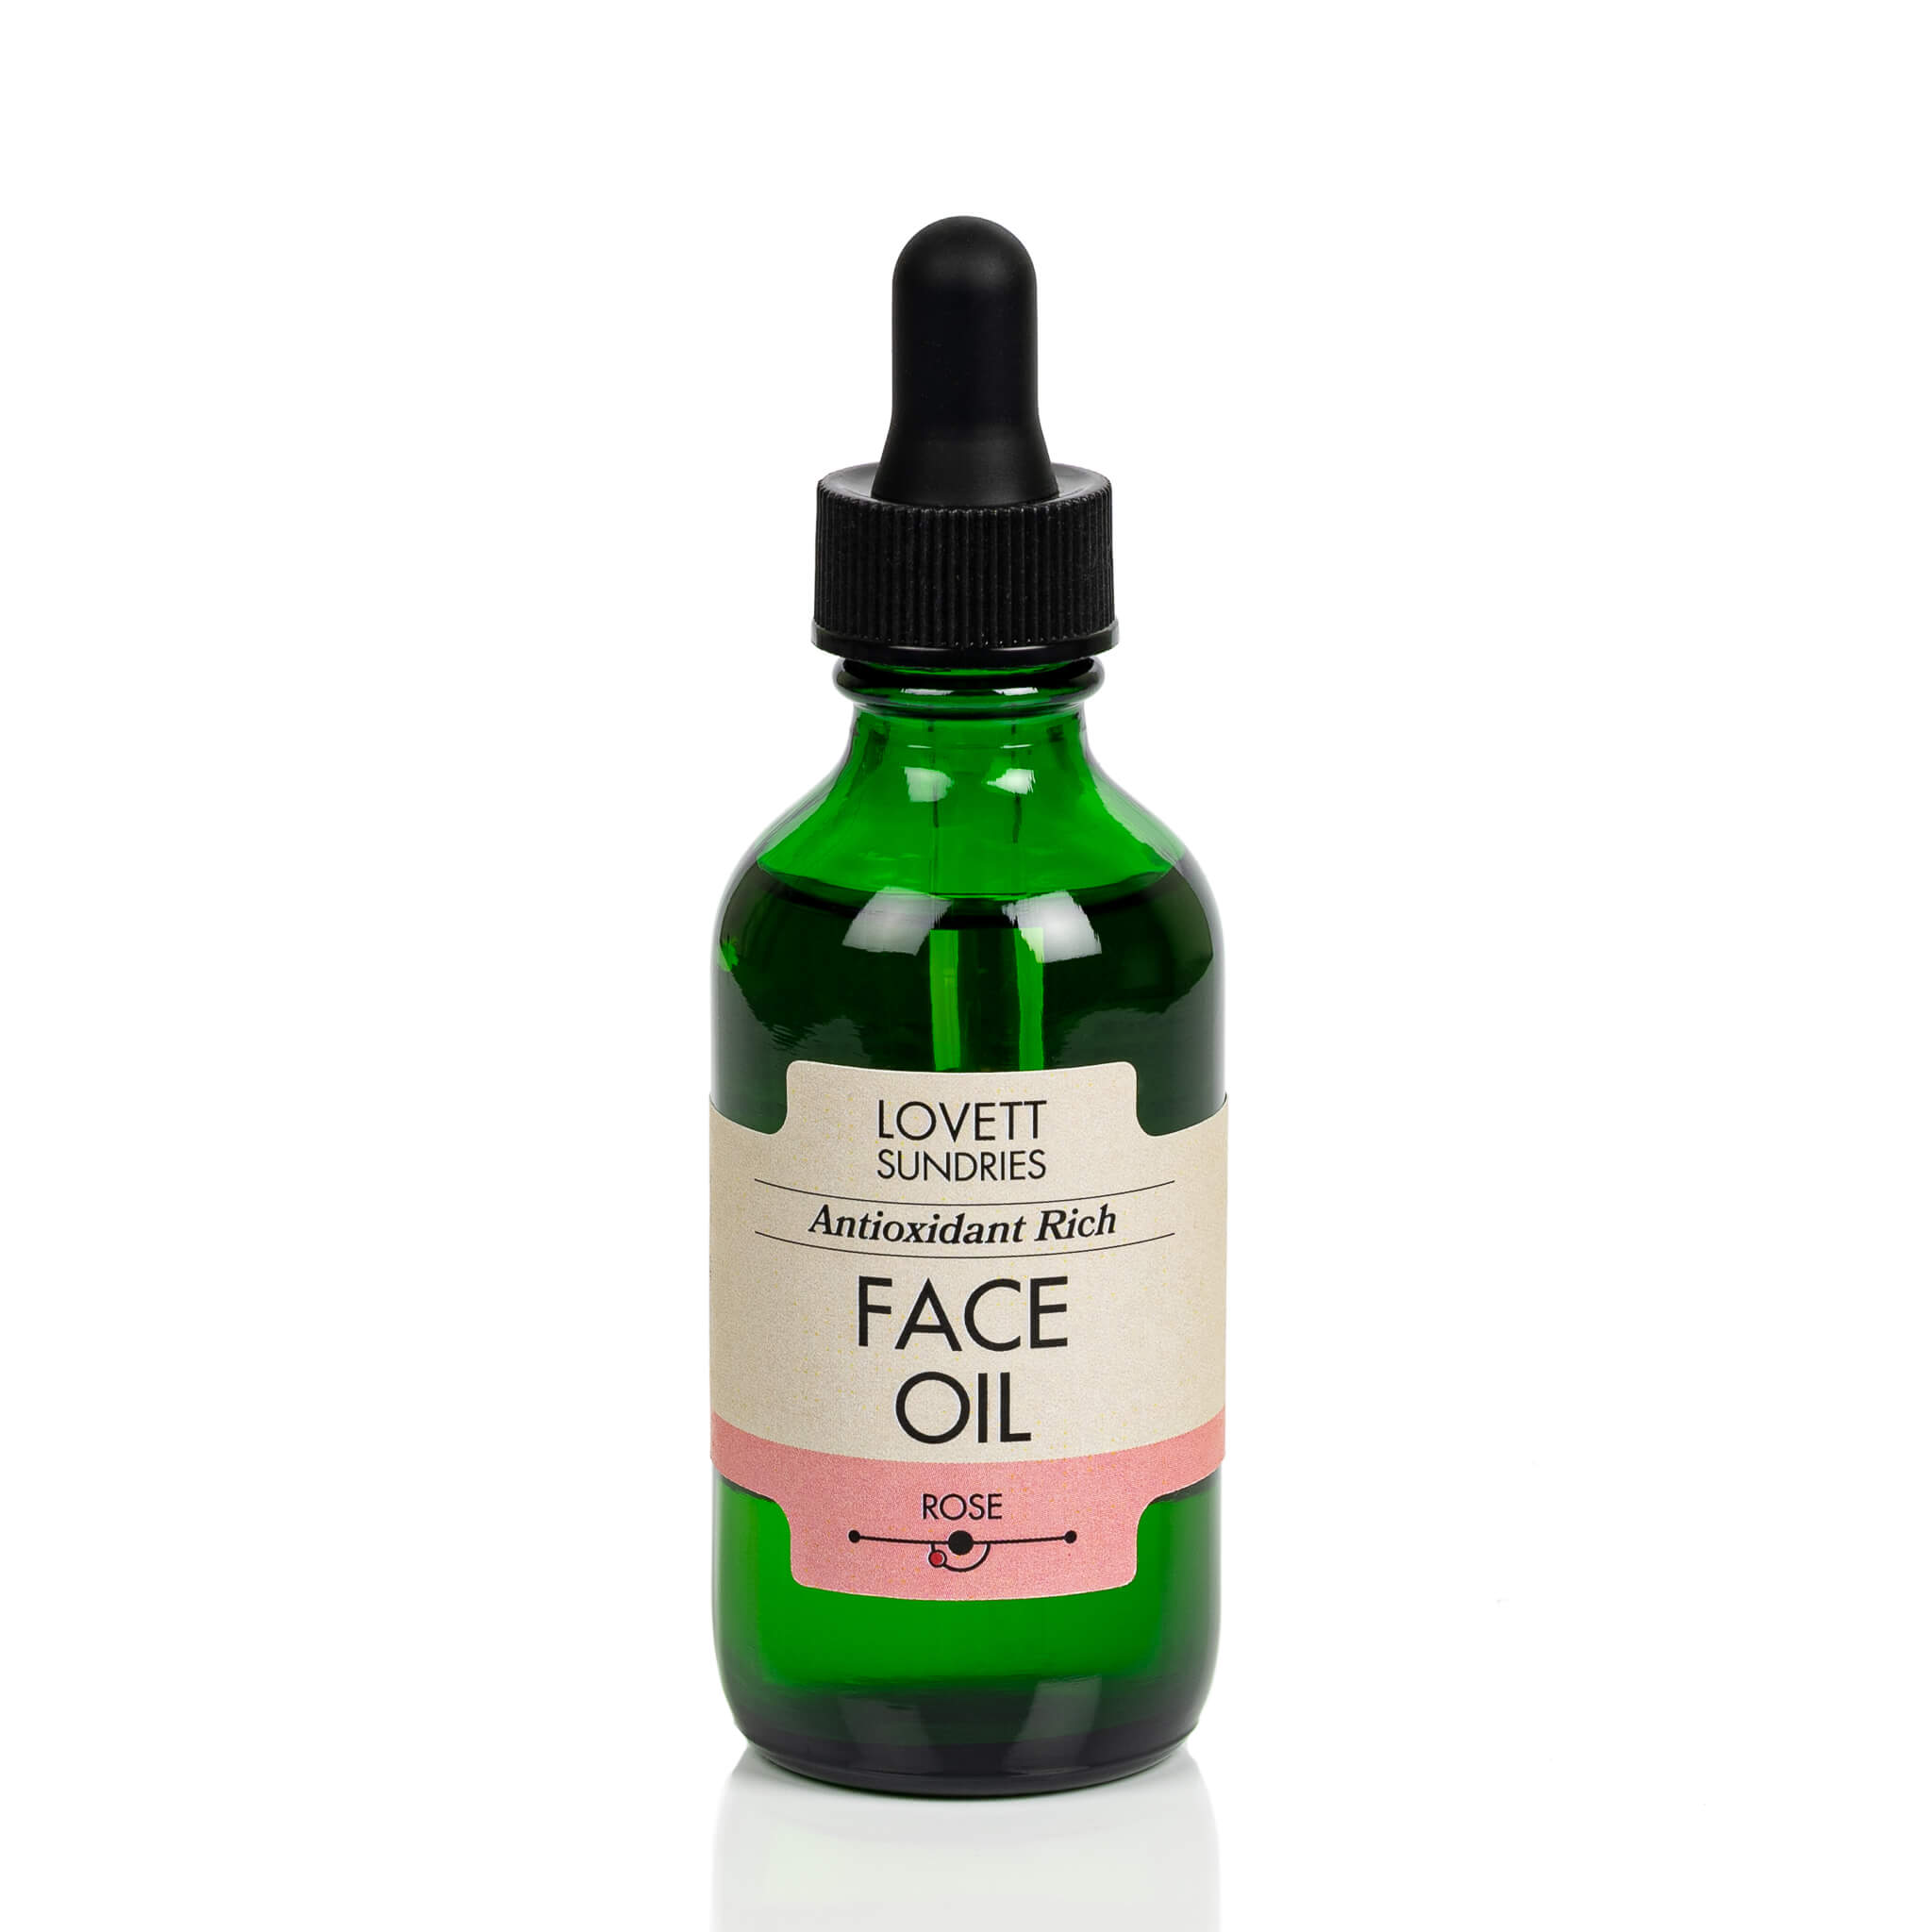 All natural antioxidant rich rose scented face oil in a green glass jar with a dropper. 